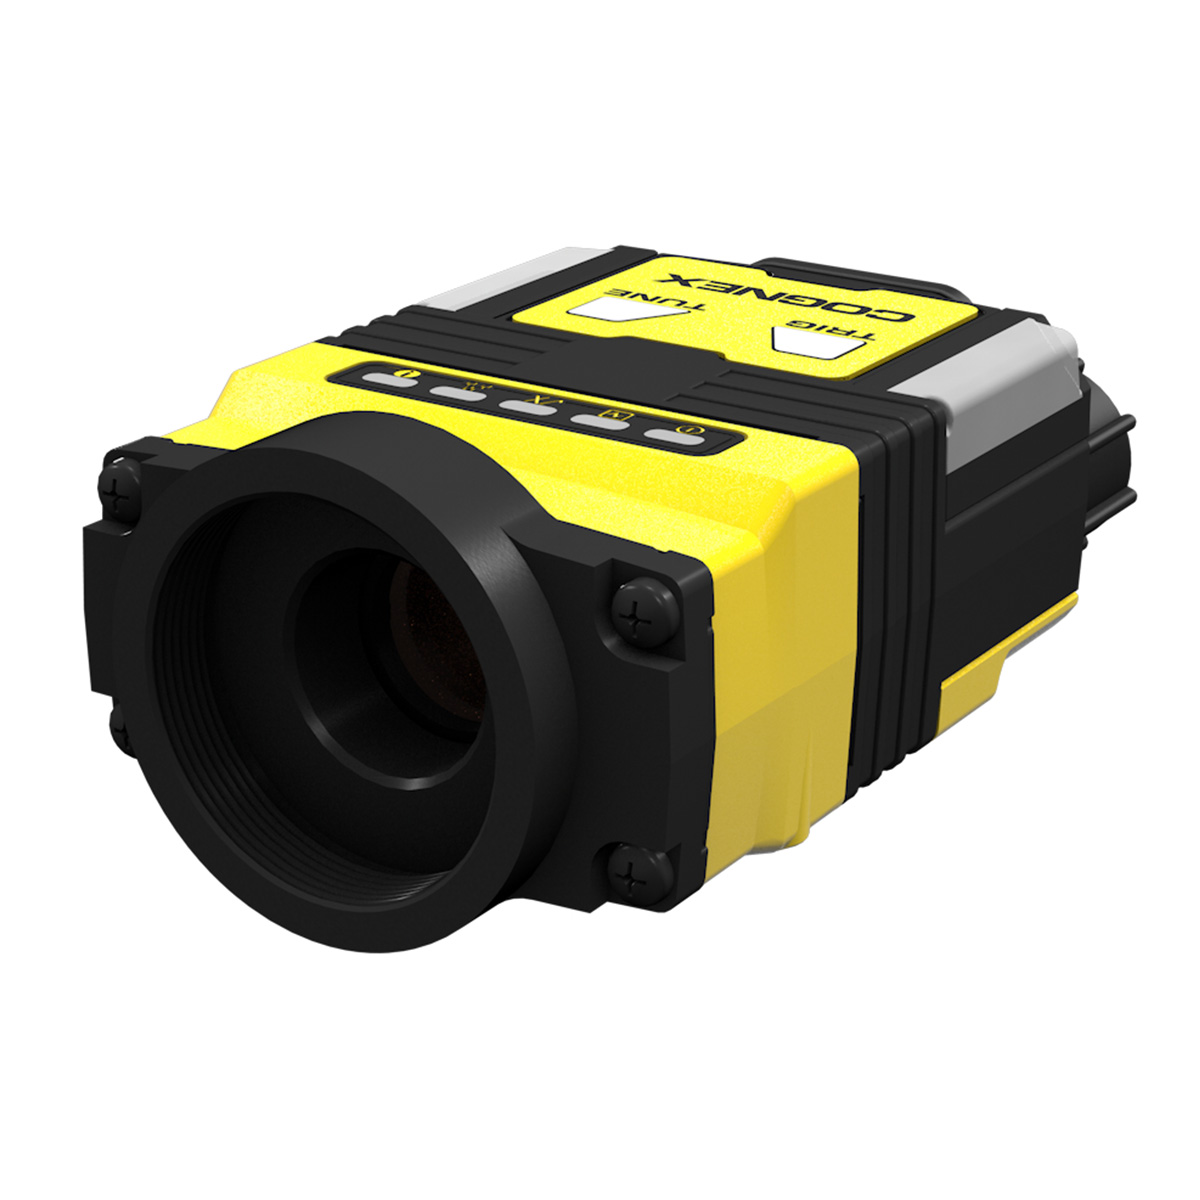 IS2802M-50000-SA COGNEX In-Sight® 2800 vision system